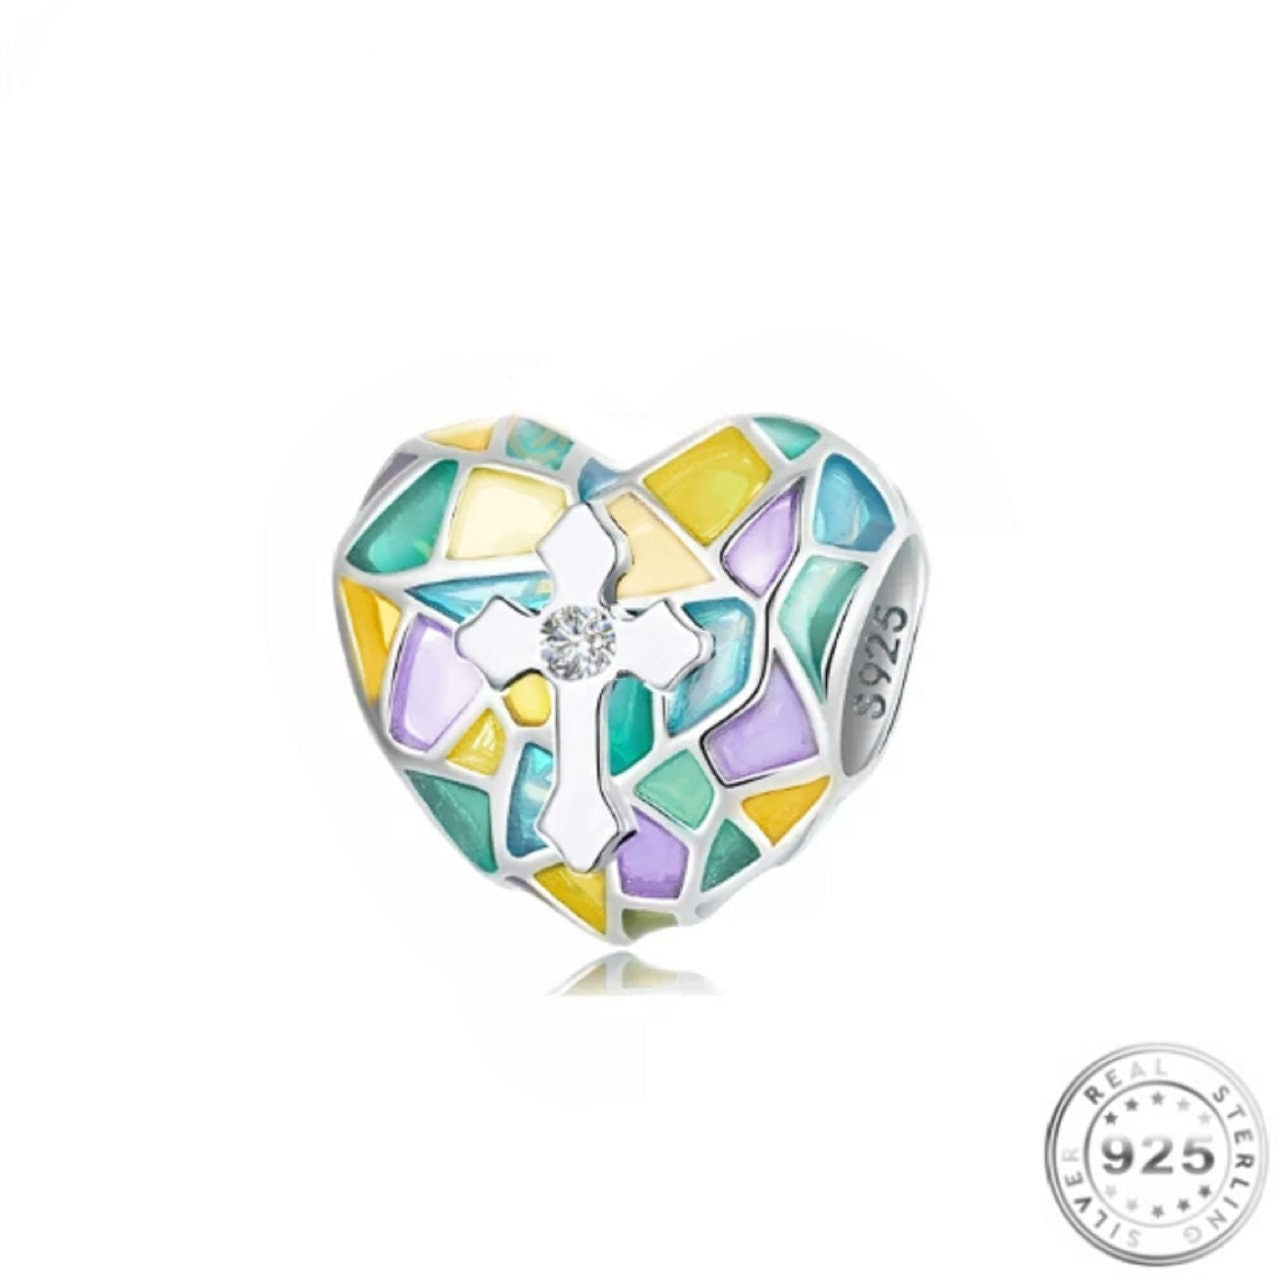 Cross in Church Stained Glass Heart Charm 925 Sterling Silver fits pandora